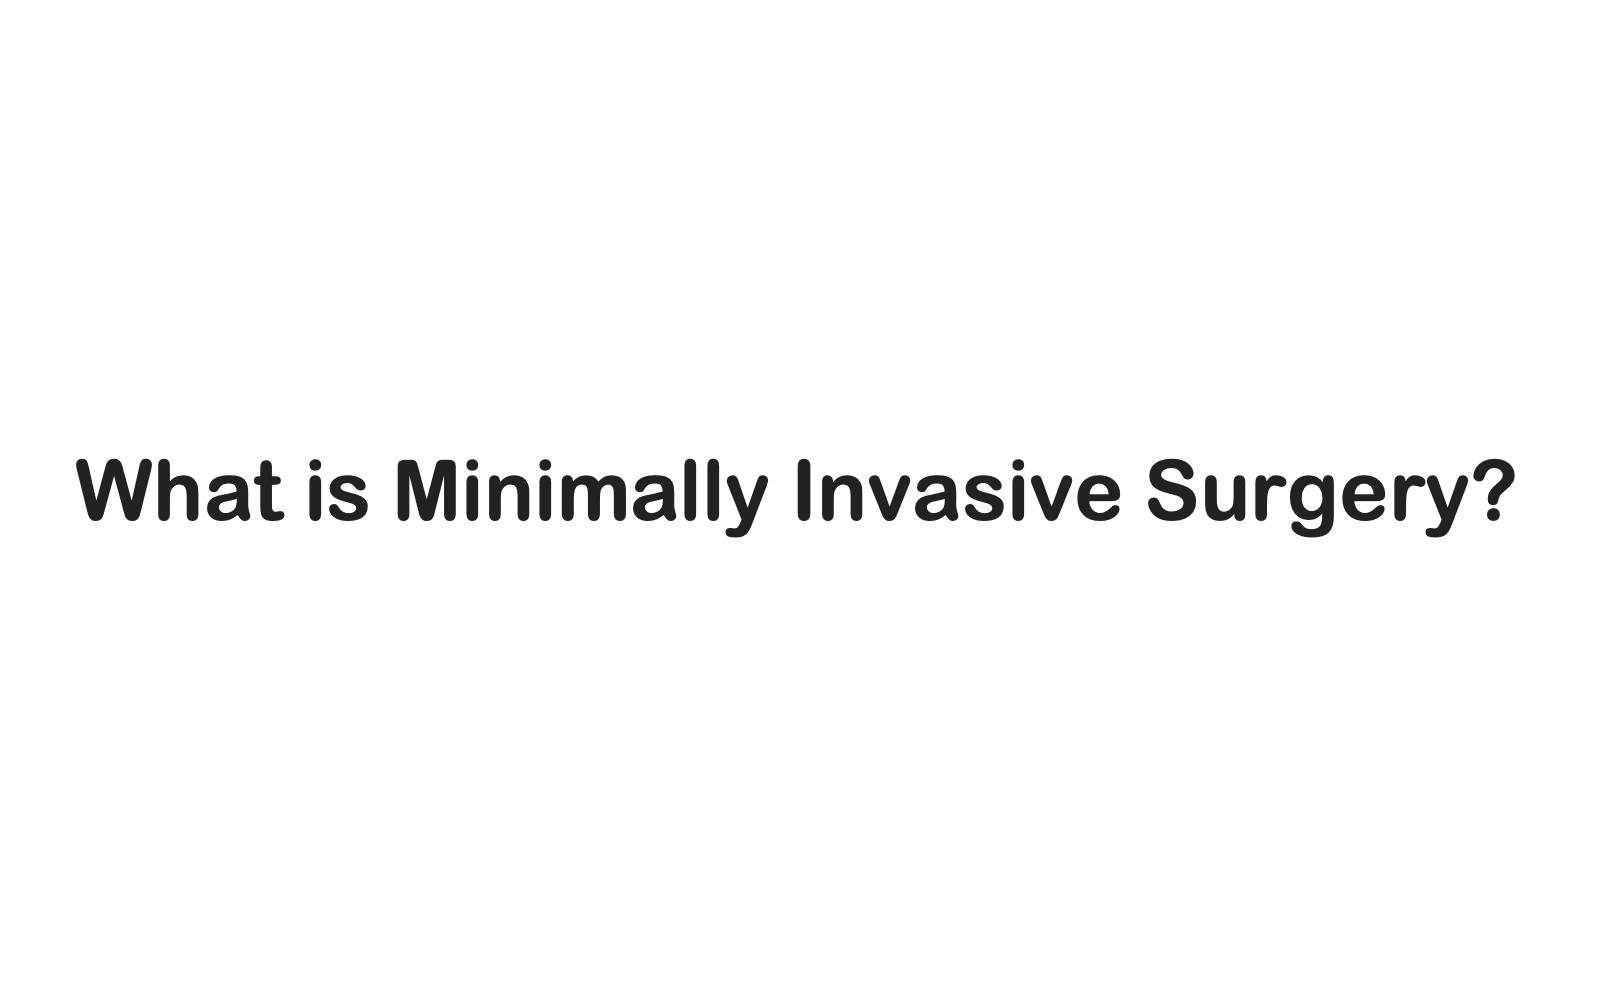 What is Minimally Invasive Surgery?